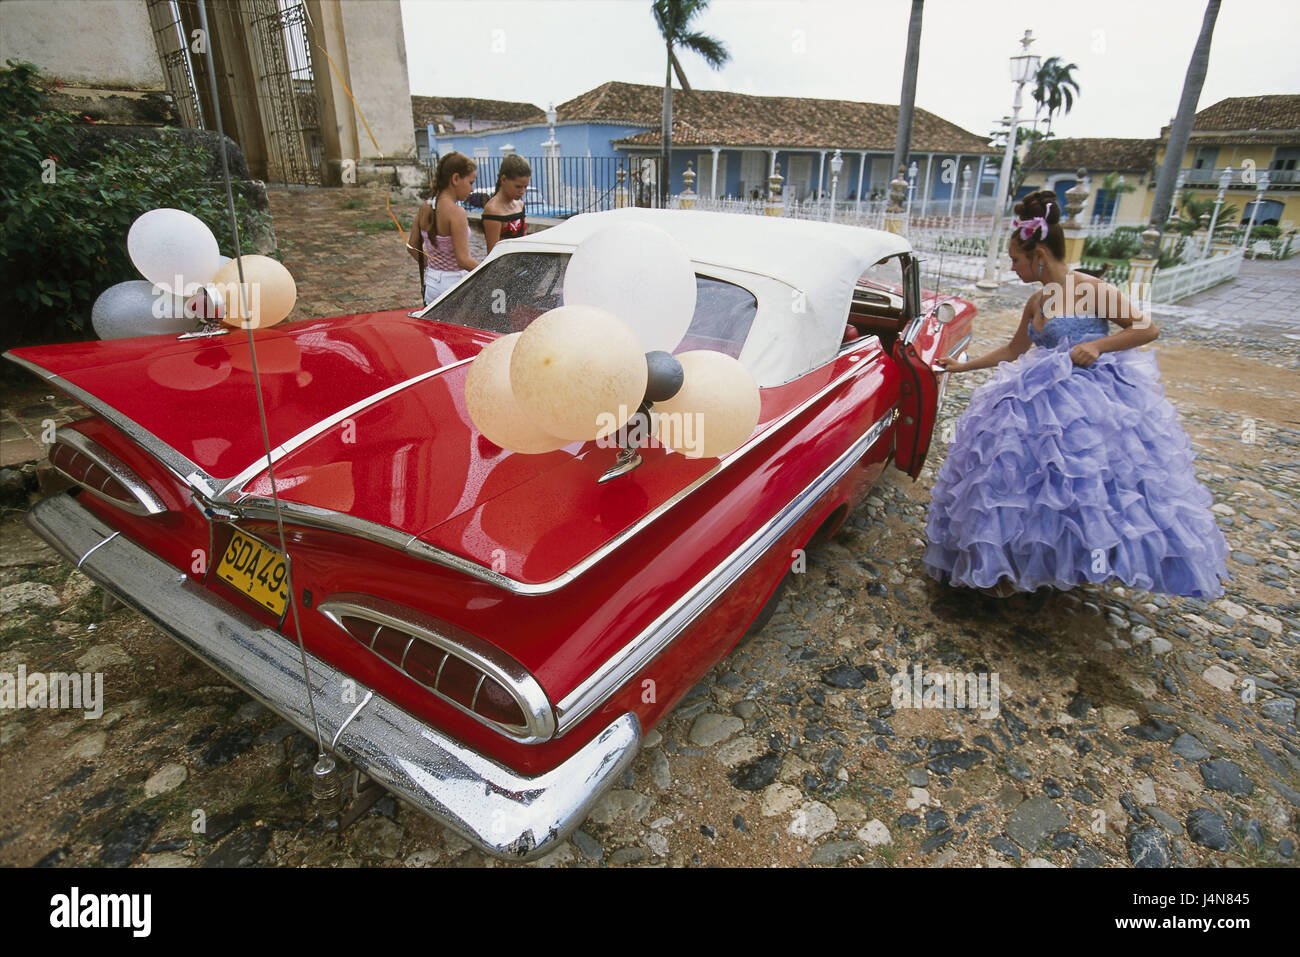 Cuba, Trinidad, Old Town, wedding car, bride, pile in, no model release, Central America, car, old-timer, red, balloons, woman, wedding dress mauve, icon, wedding, love, affection, togetherness, luck, joy, harmony, togetherness, Idyll, lifestyle, wedded bliss, outside, Stock Photo